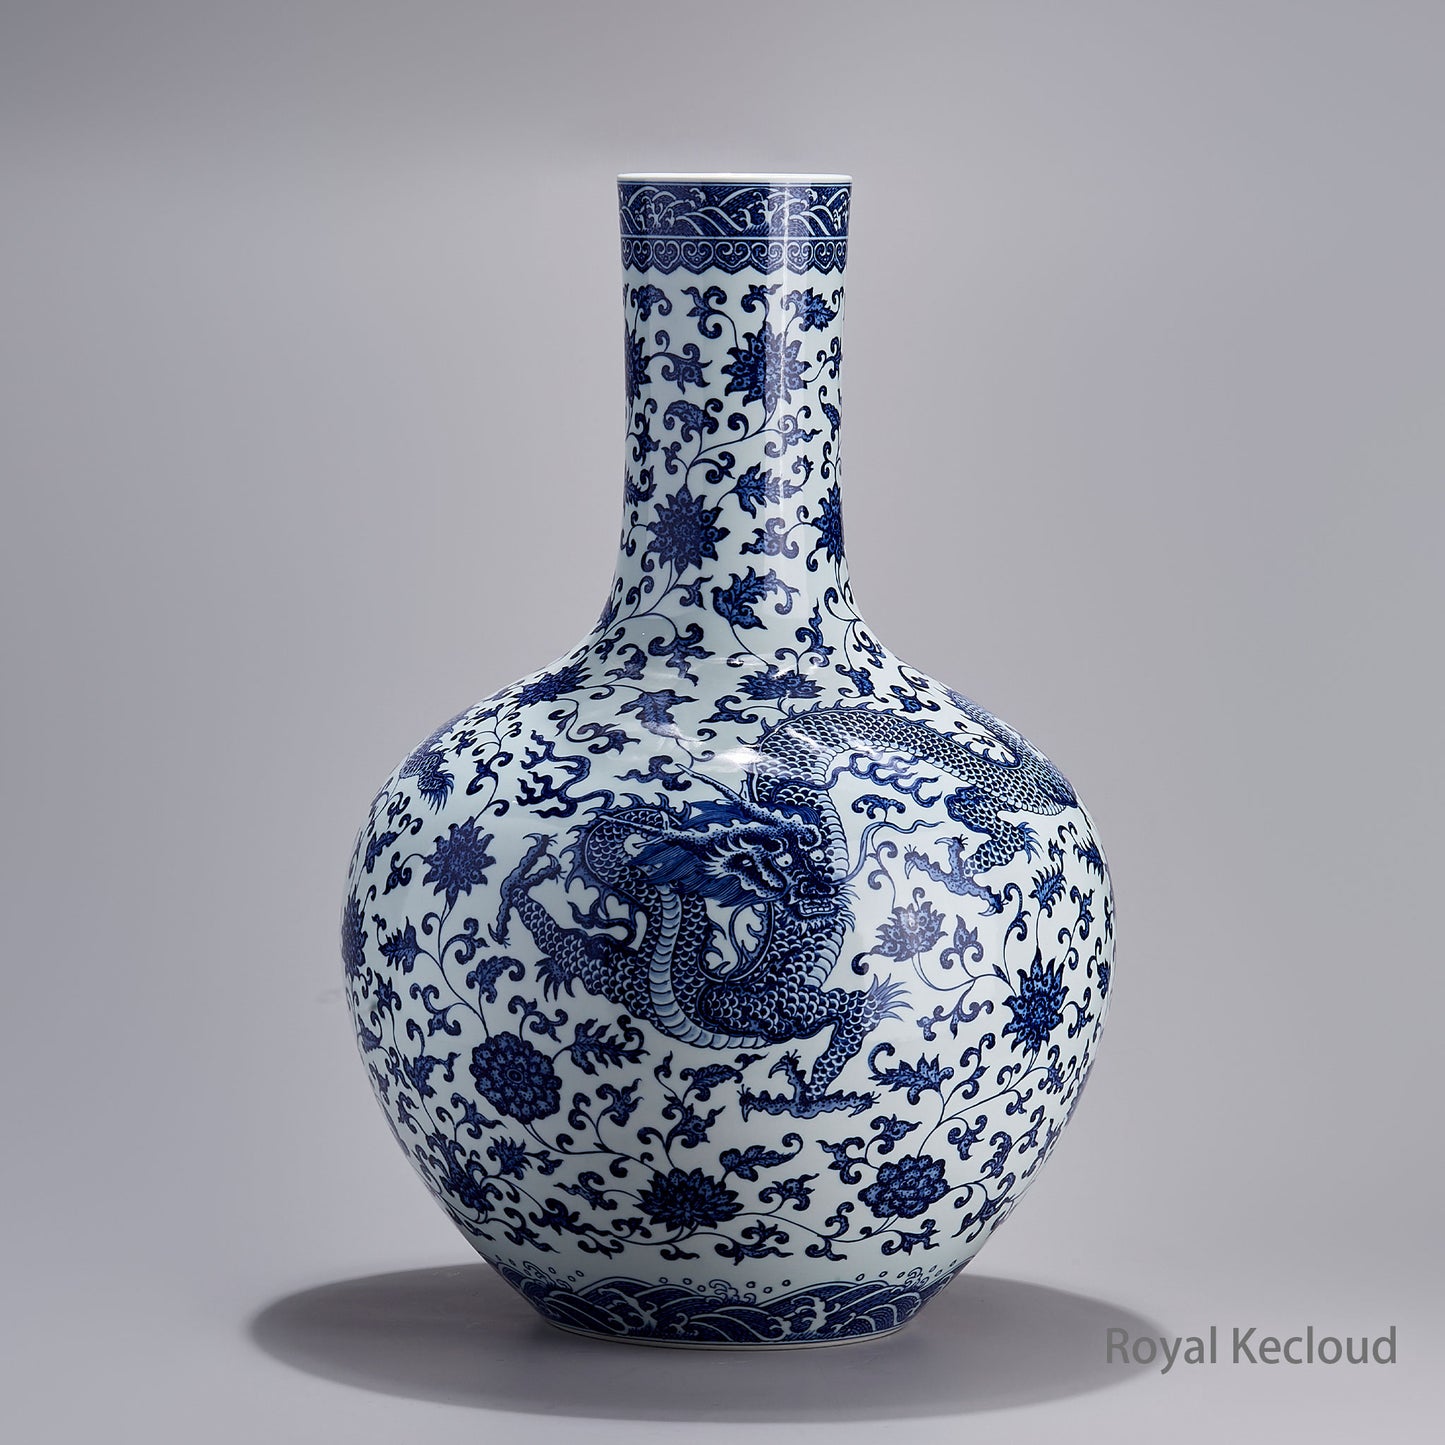 Jingdezhen Handmade Blue-and-white Vase with the Design of Dragon Flying among Flowers